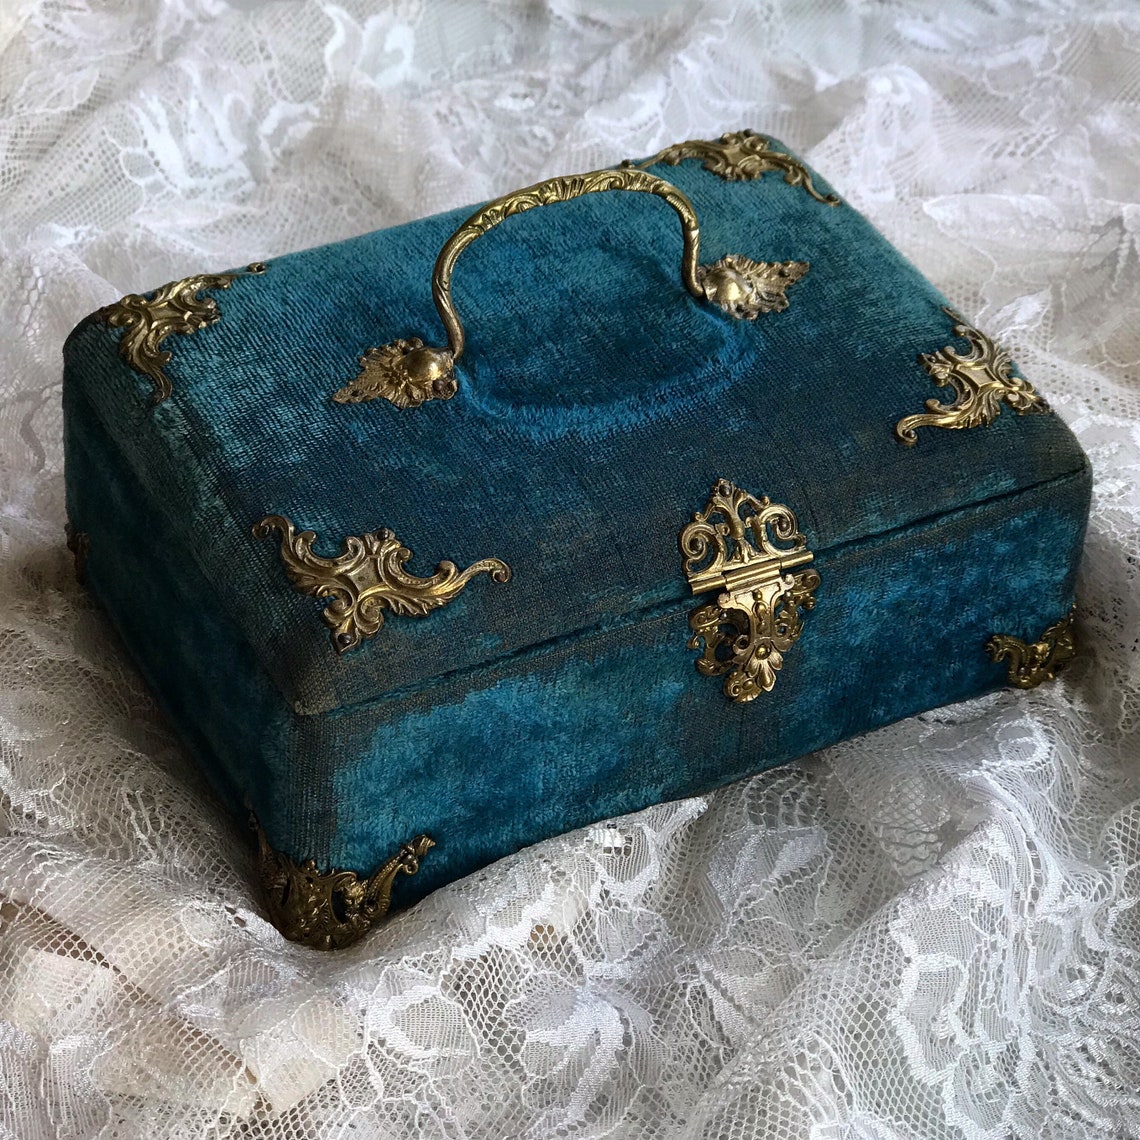 Exquisite Victorian Napoleon III Sewing / Jewelry Box in | Etsy